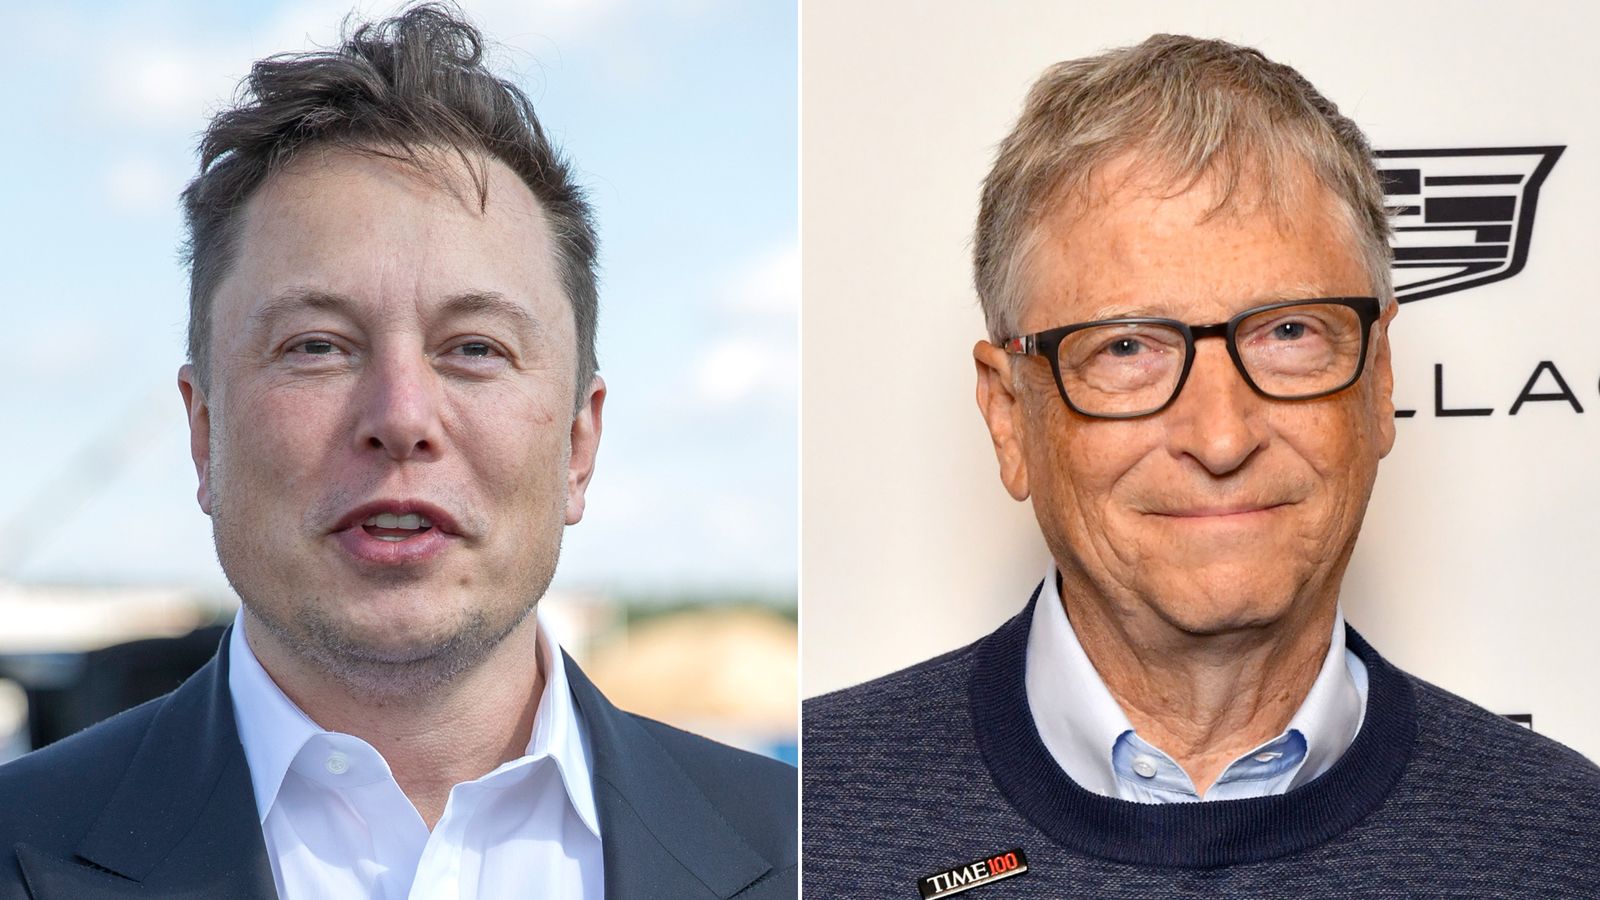 Le luxurious lunch! When world's 2 wealthiest men, Elon Musk and